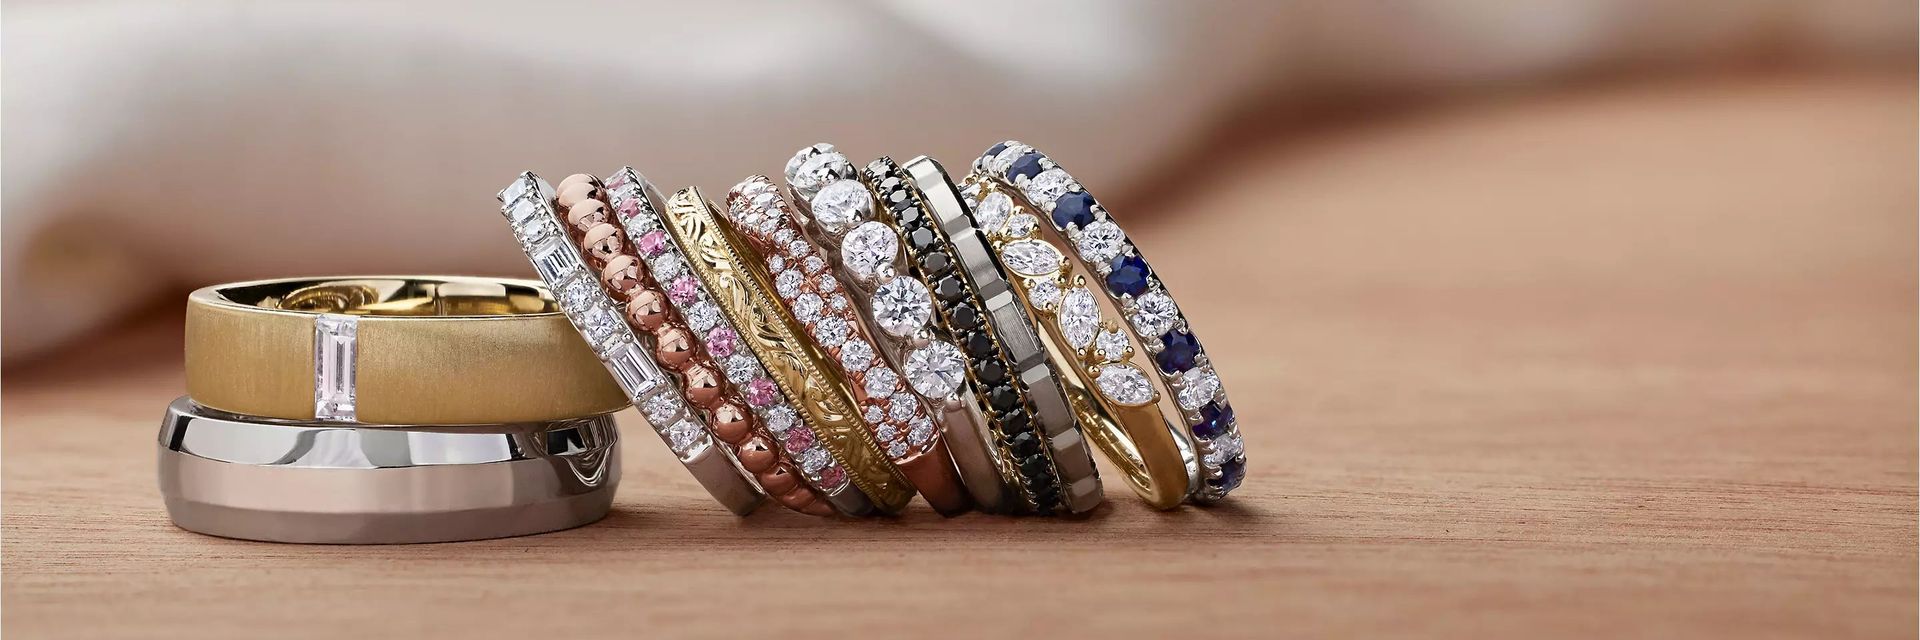 12 wedding rings with a variety of diamonds, metals, and designs, all on a beige surface